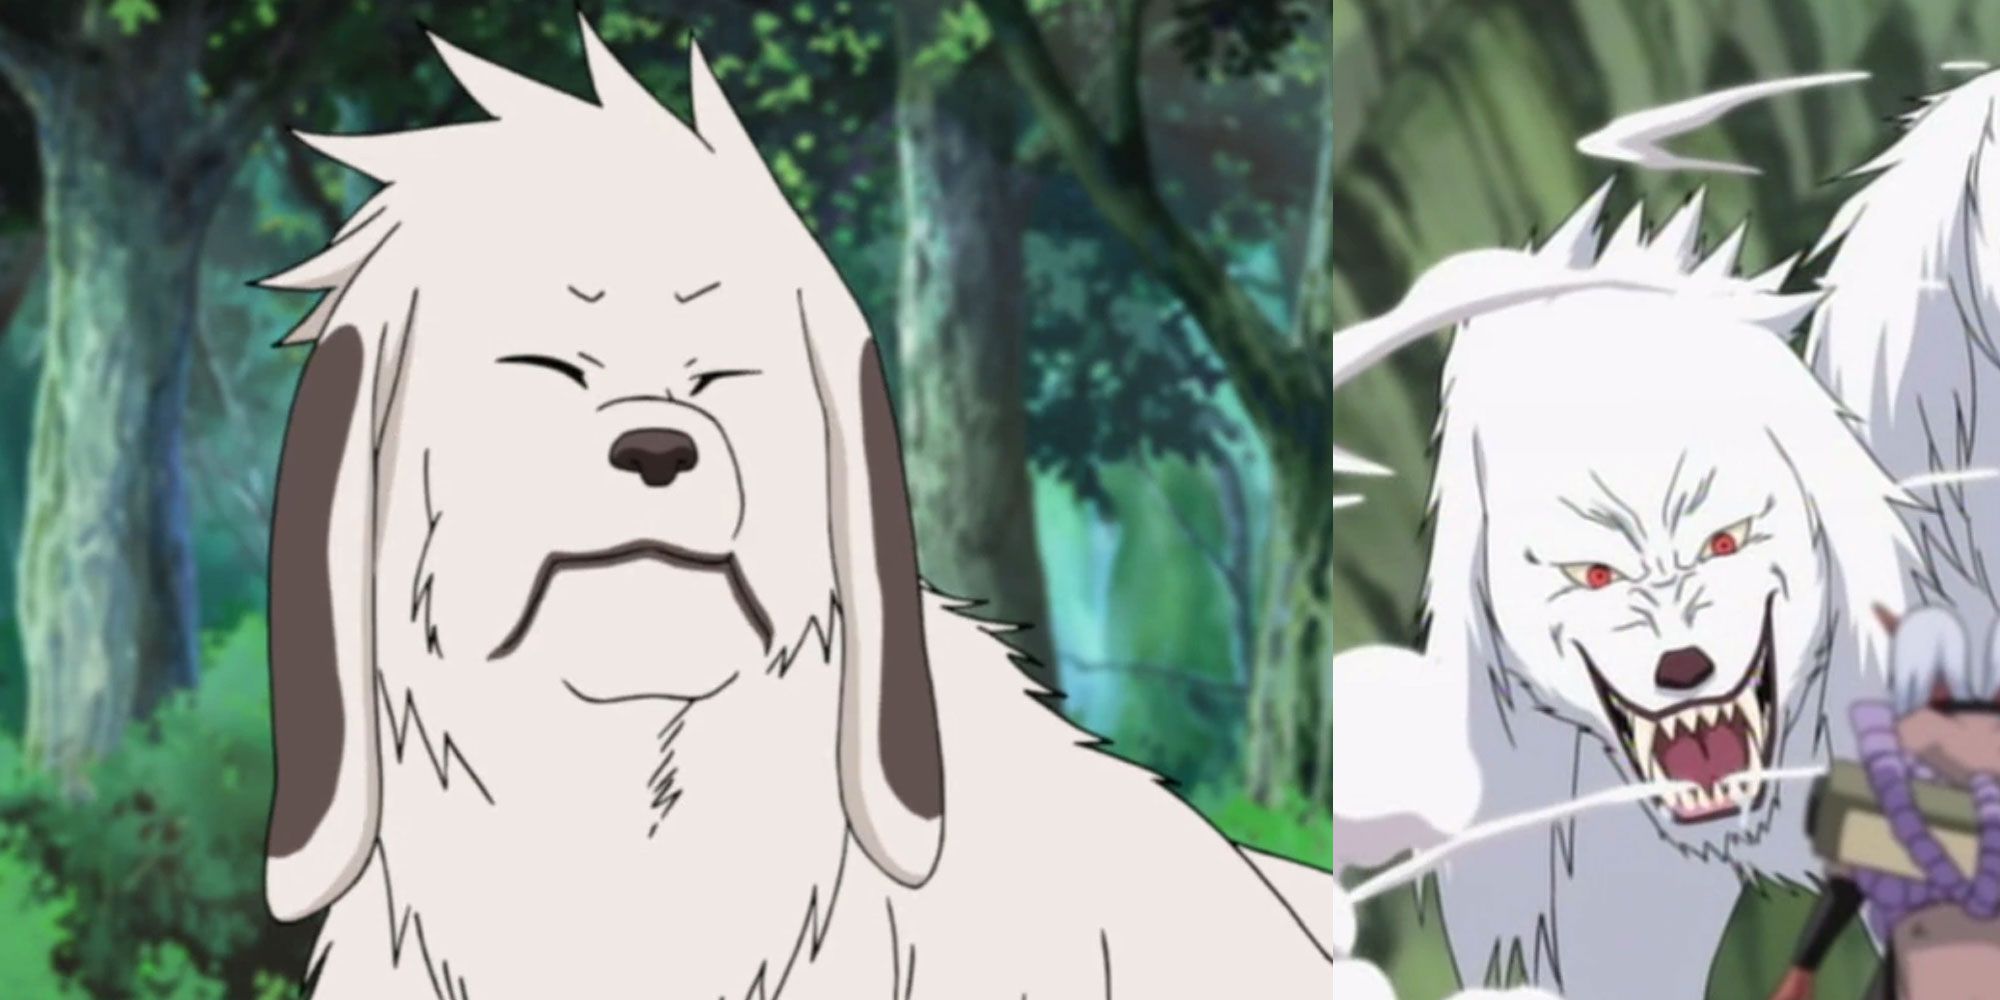 A split image features two different views of Akamaru in the Naruto franchise